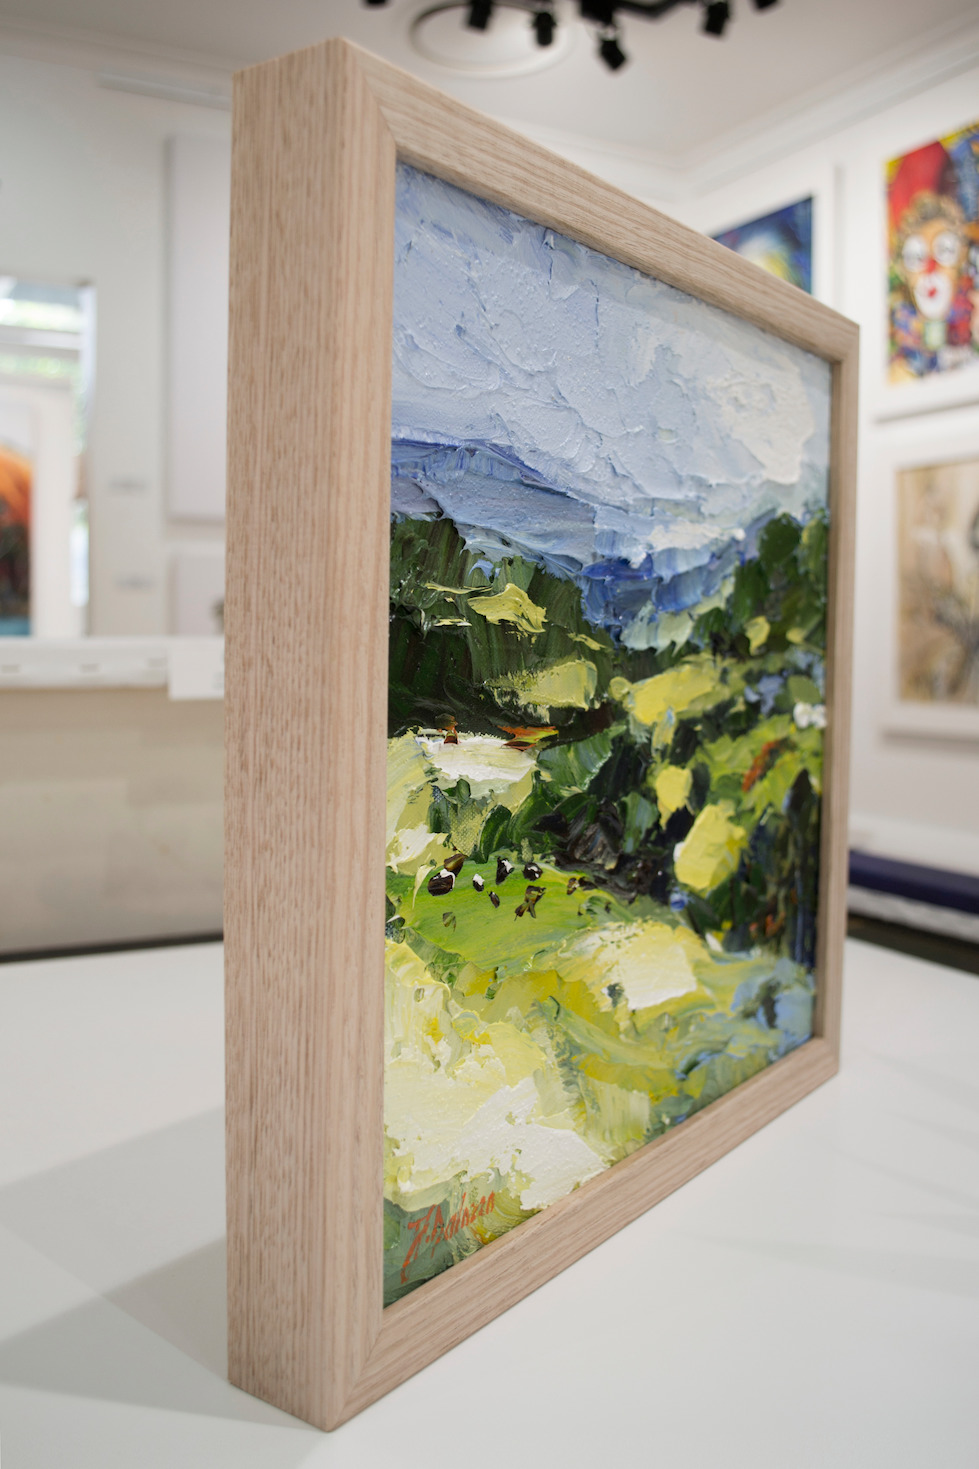 Framed Side View Of Landscape Painting "Numinbah Valley Livestock Property" By Judith Dalozzo